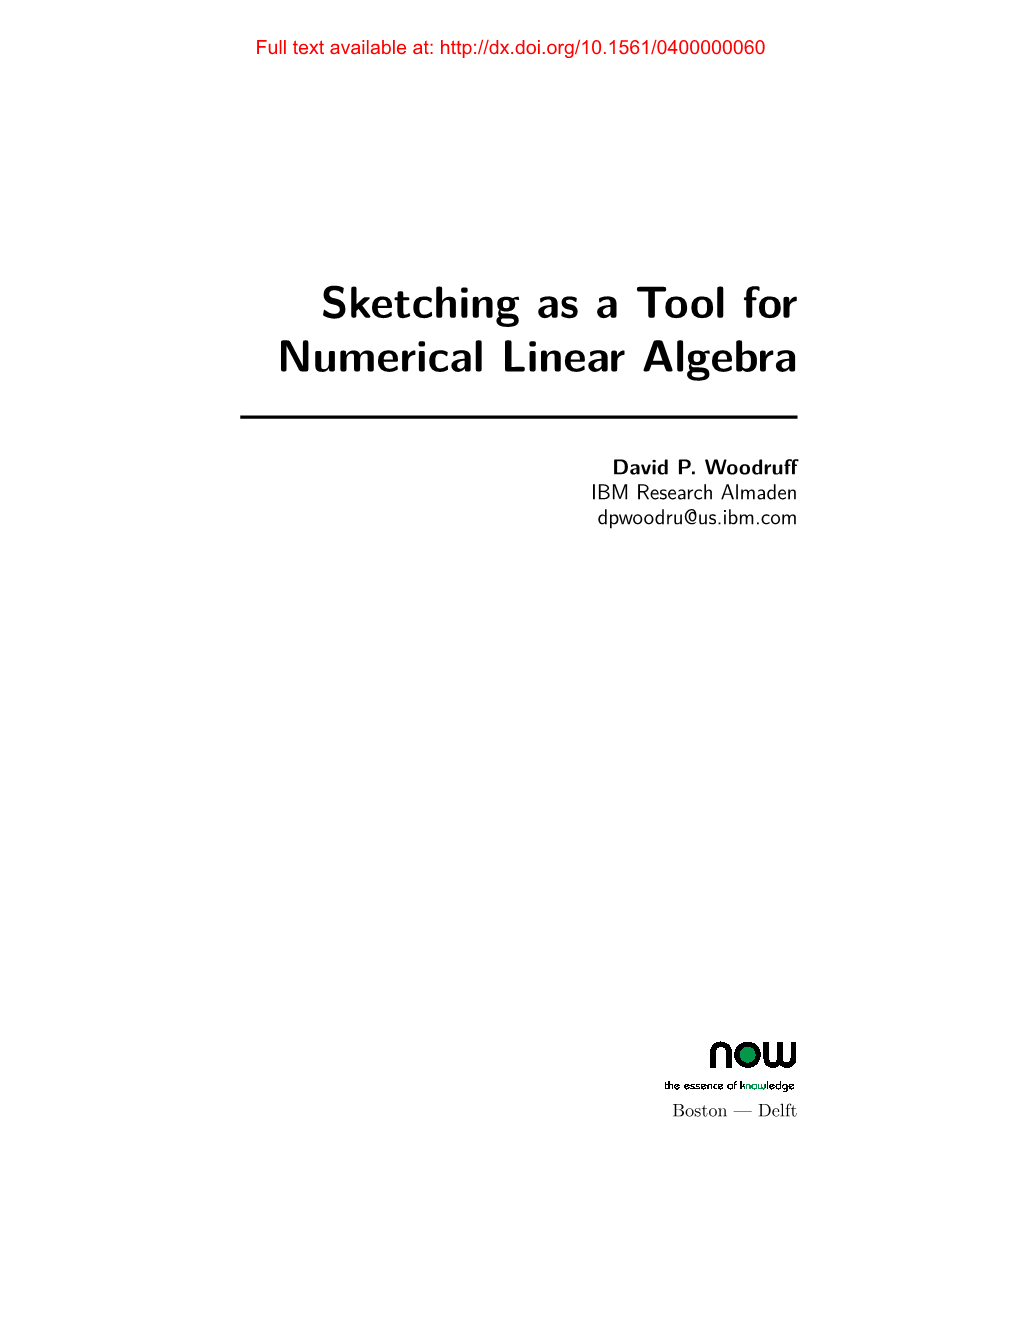 Sketching As a Tool for Numerical Linear Algebra